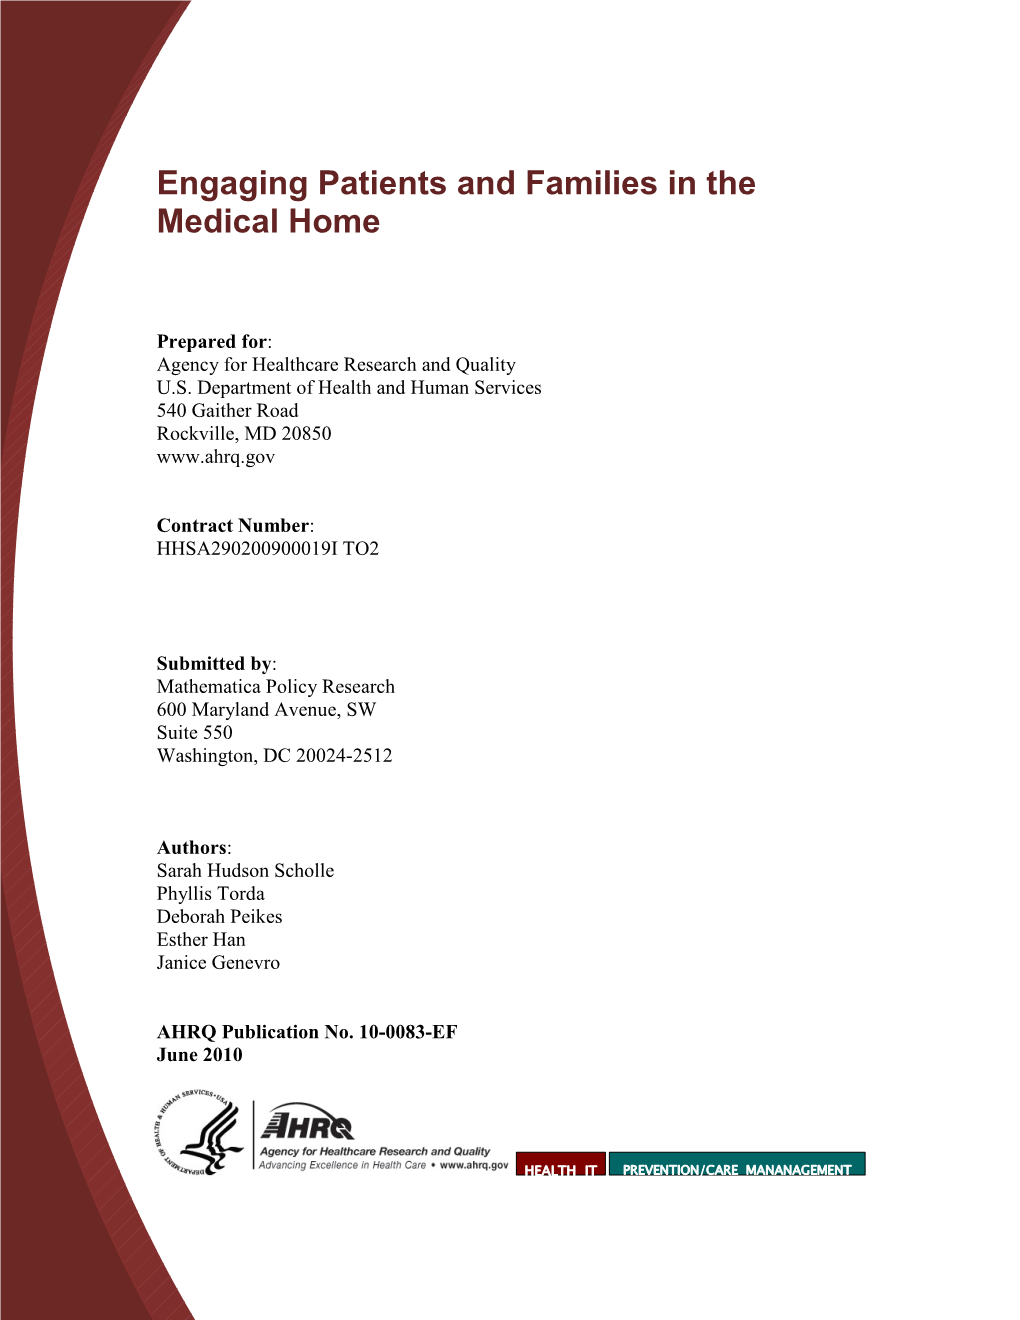 Engaging Patients and Families in the Medical Home